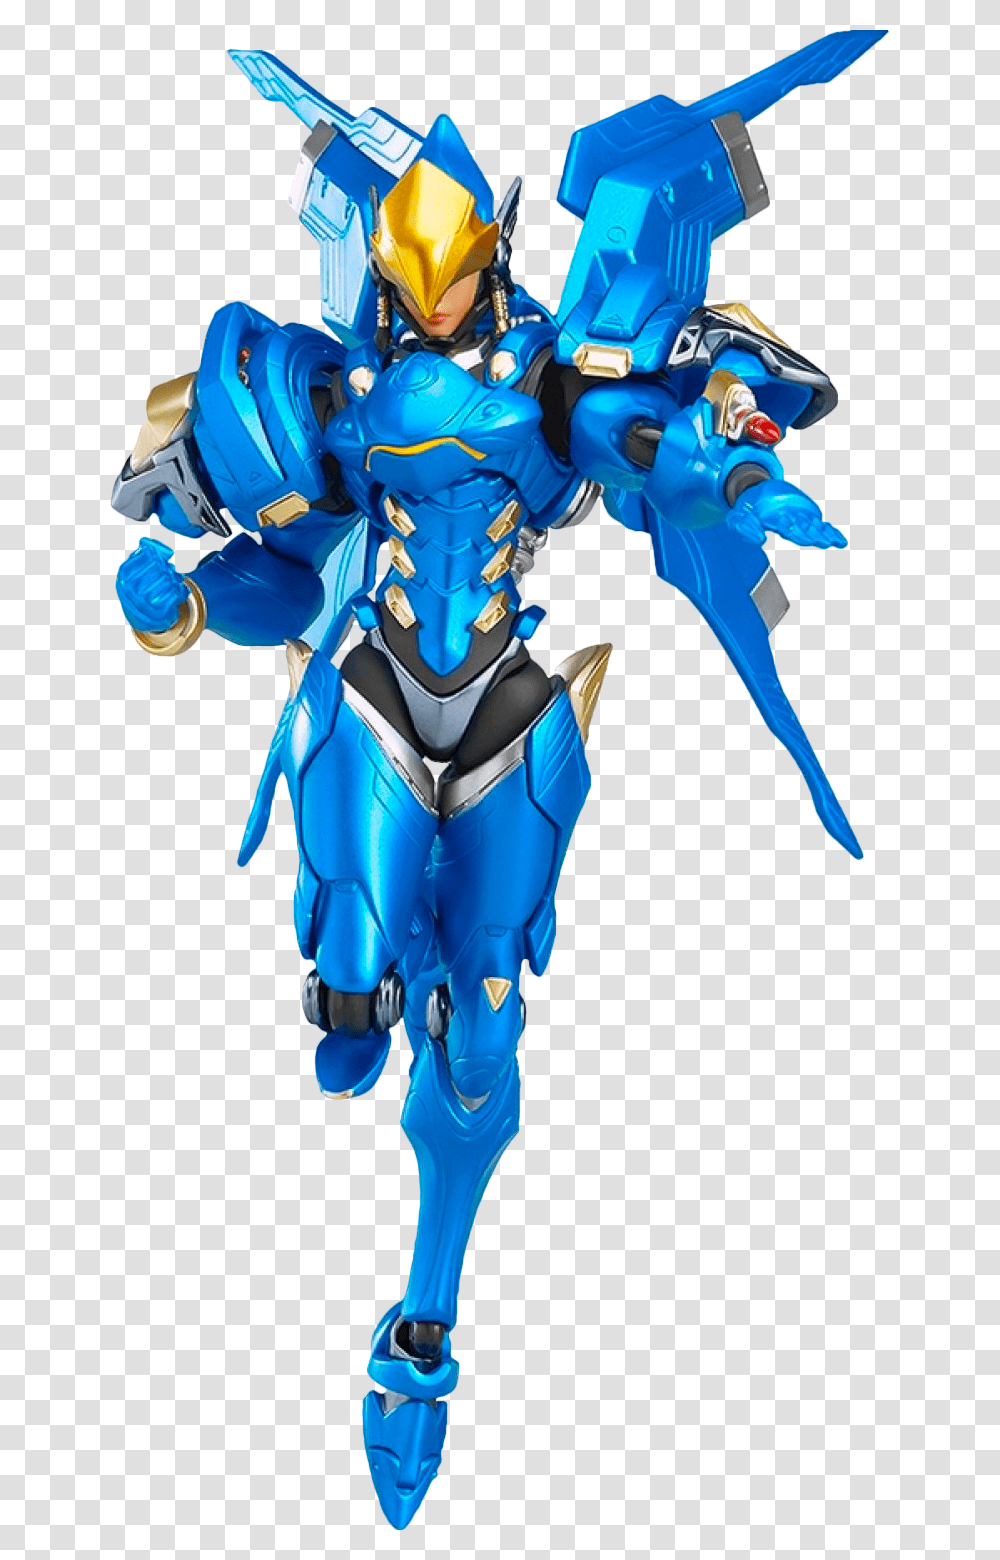 Pharah Figma 6 Action Figure Overwatch Action Figures Figma, Toy, Costume Transparent Png